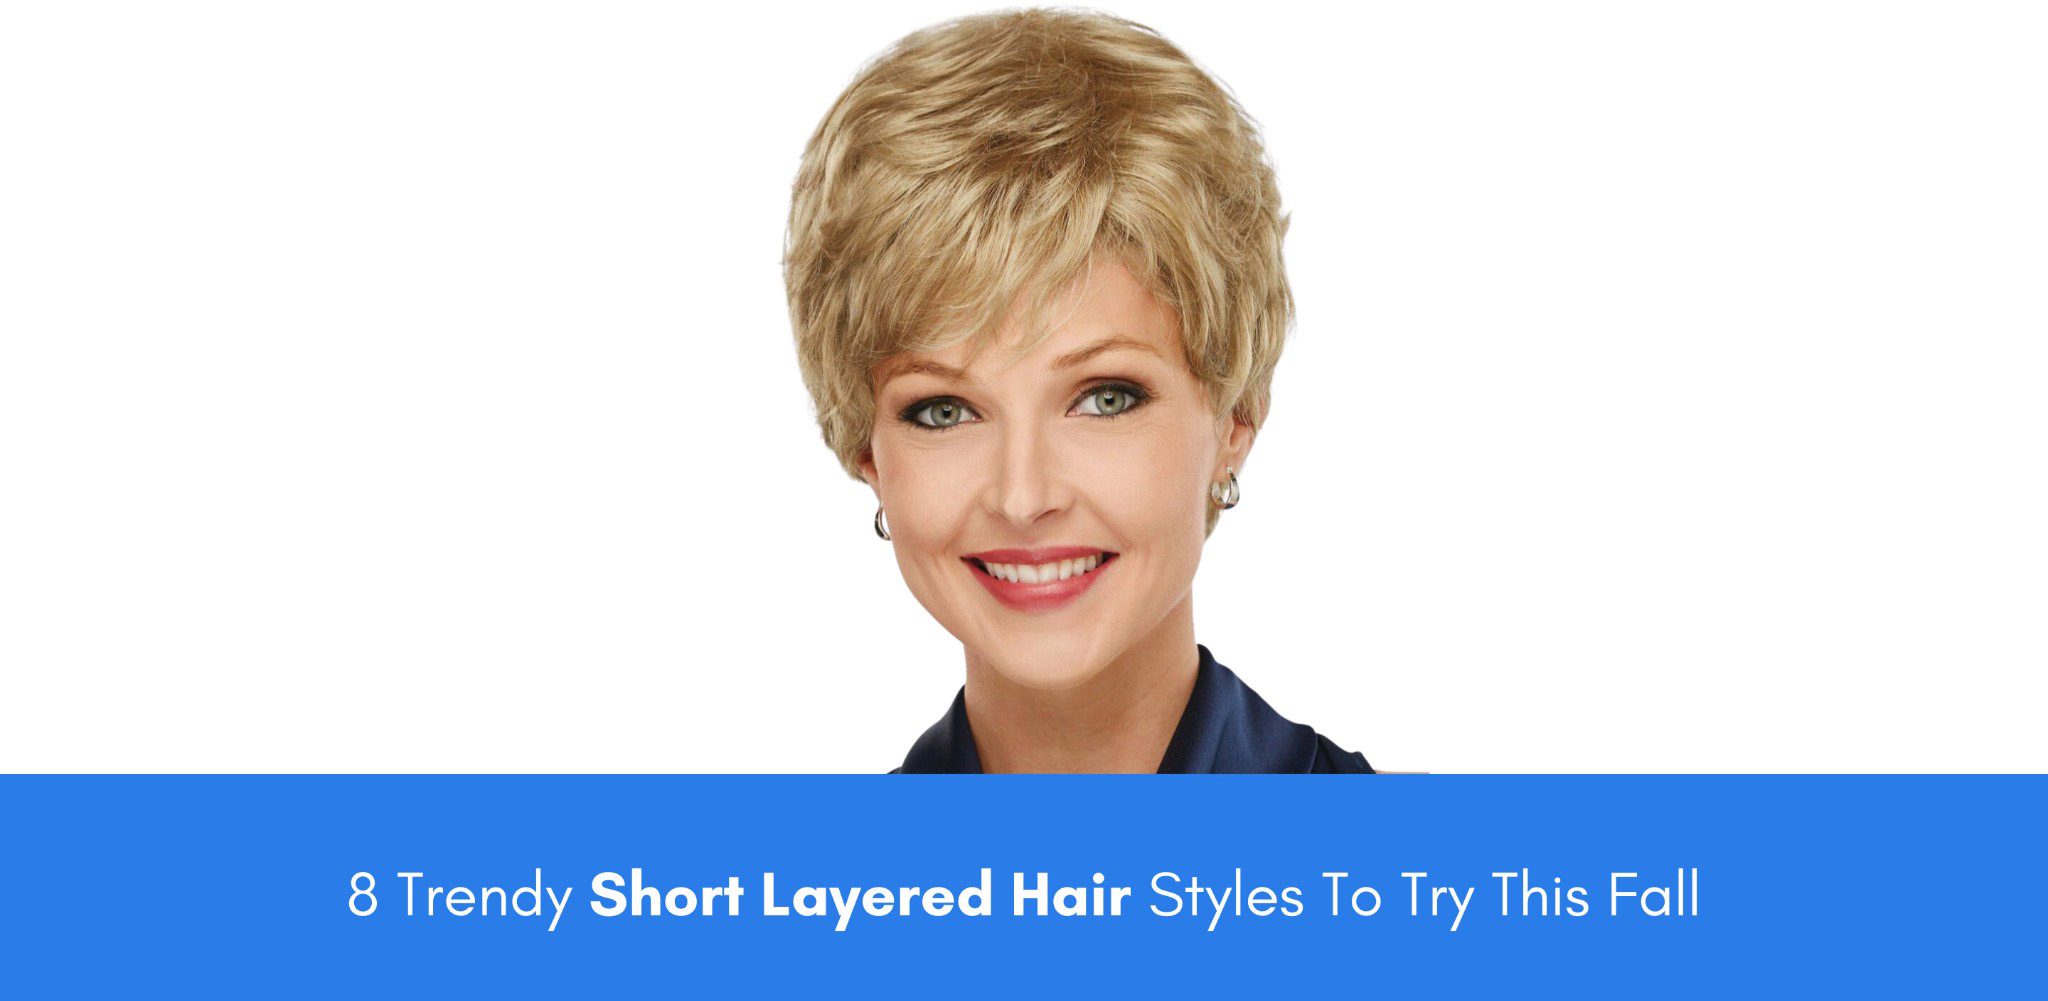 8 Trendy Short Layered Hair Styles To Try This Fall